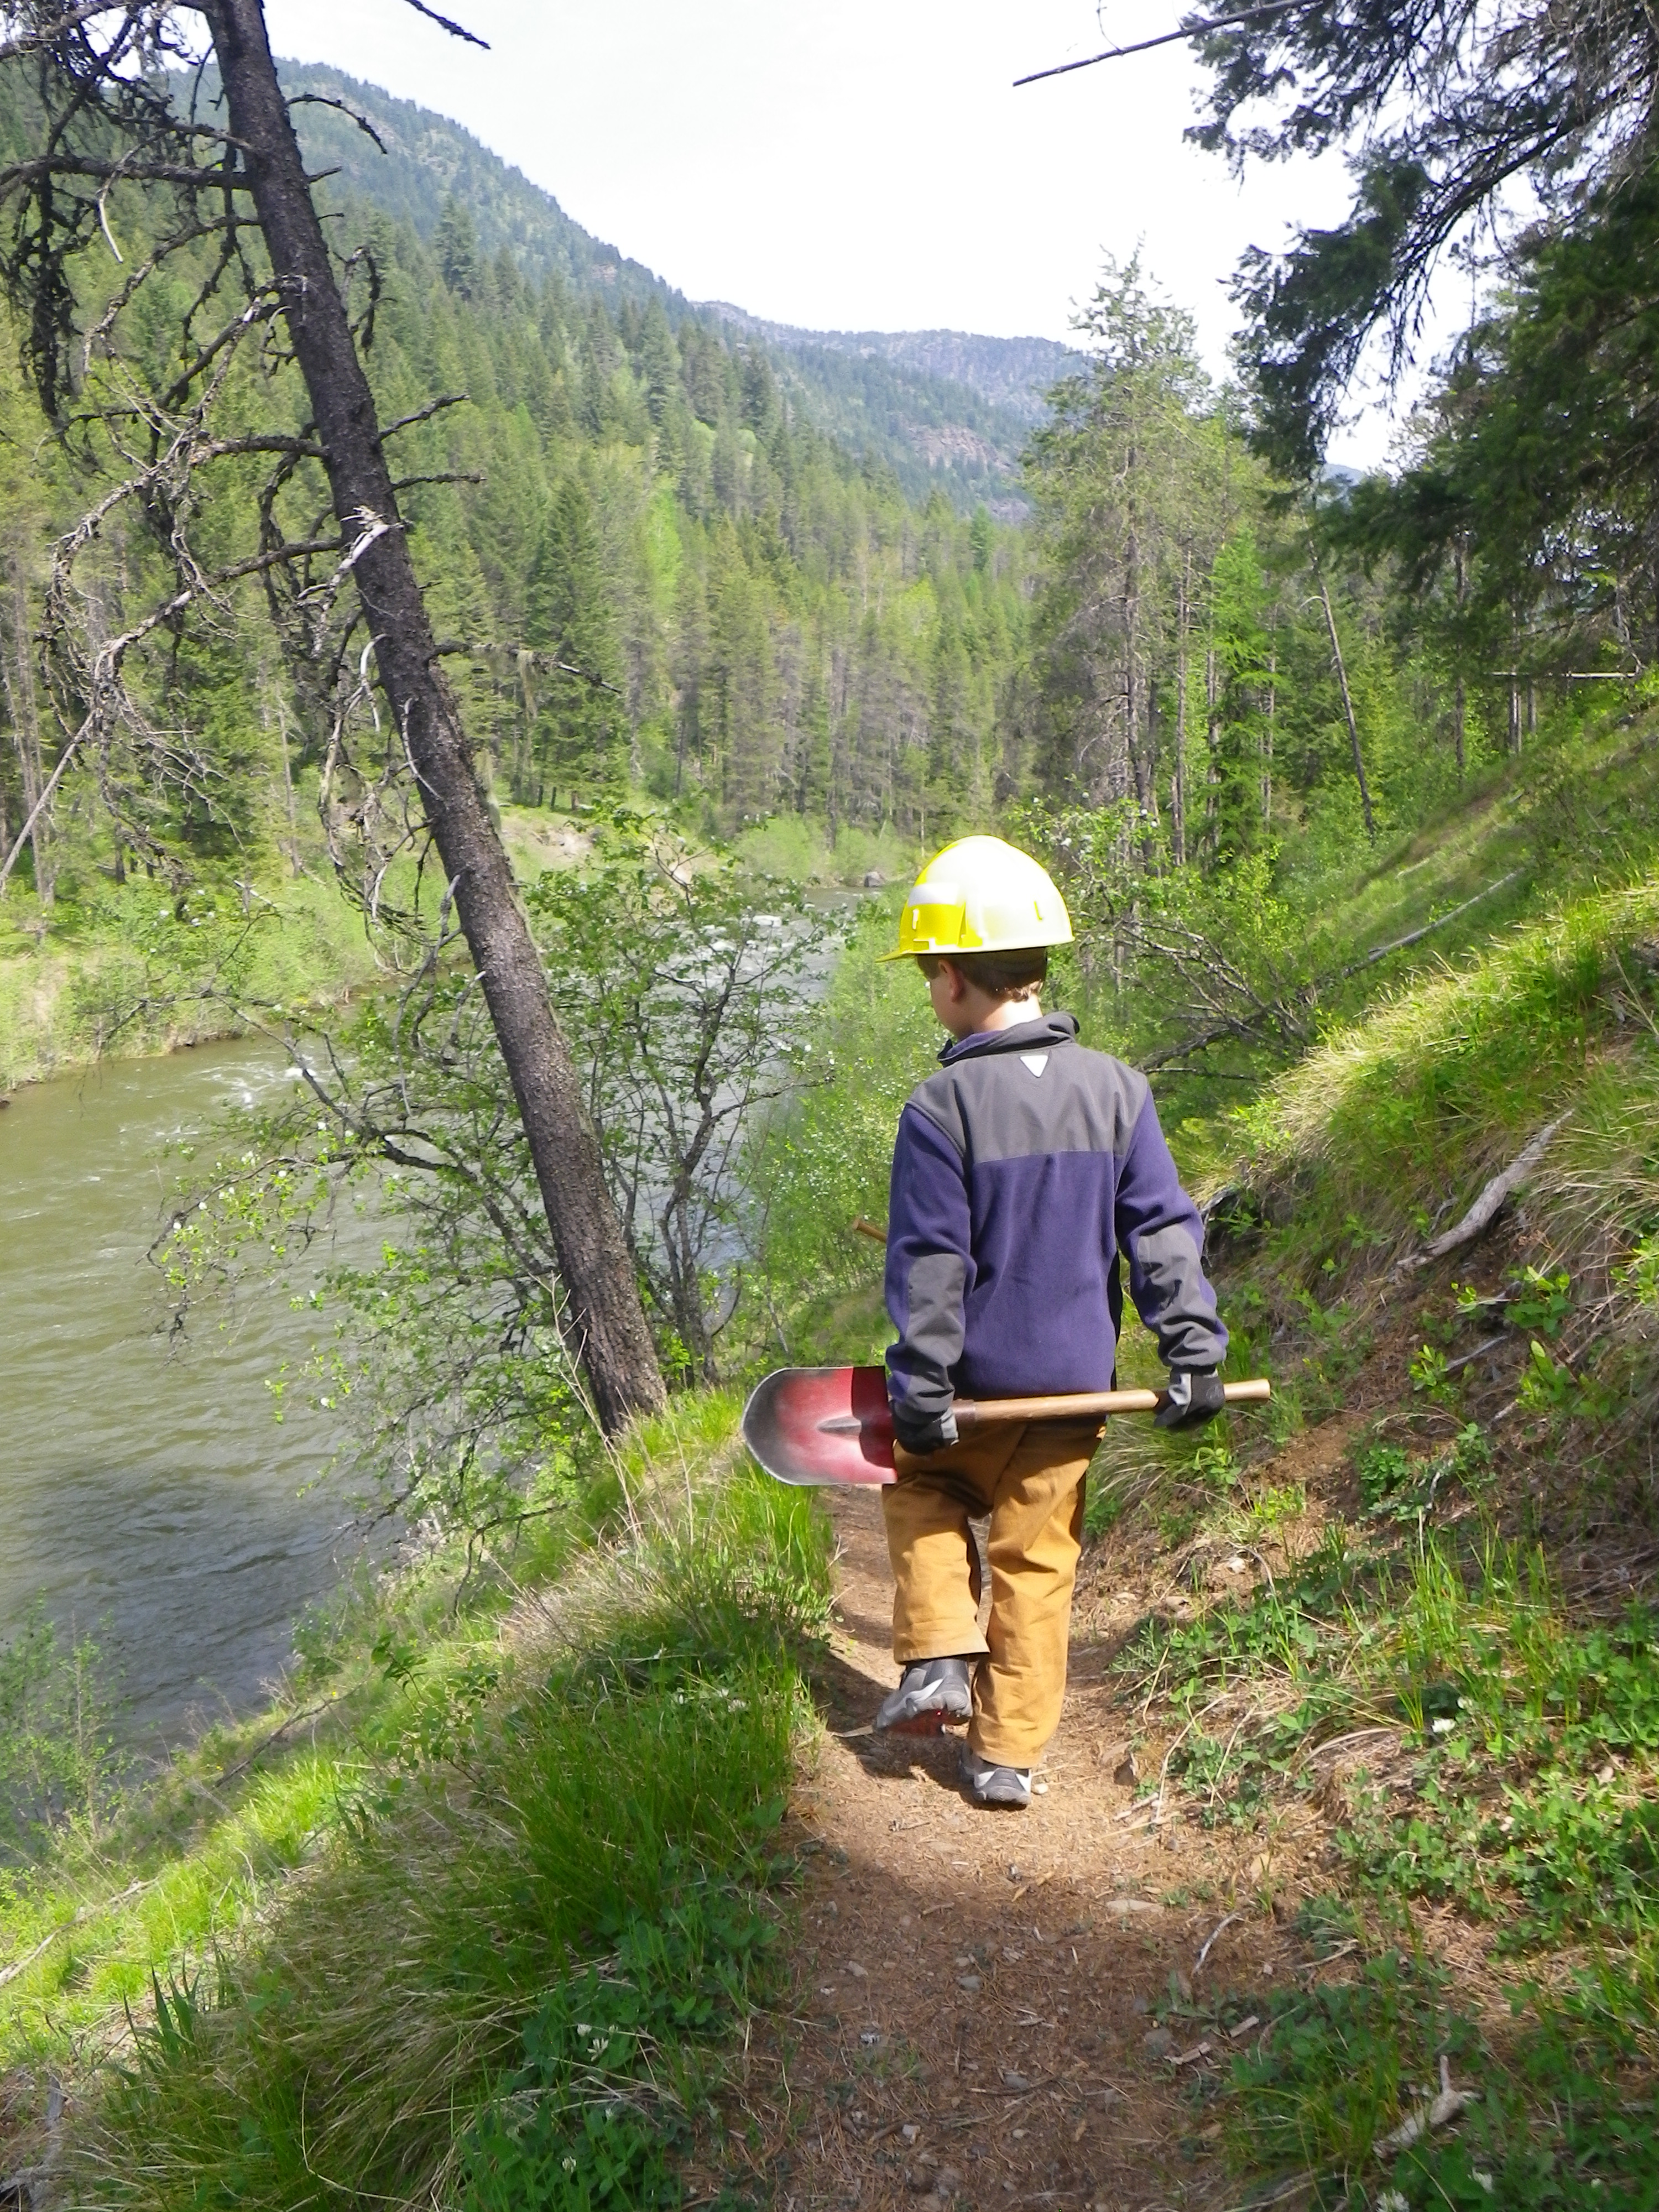 A young volunteer with a shovel working on a hiking trail in the Montana wilderness.